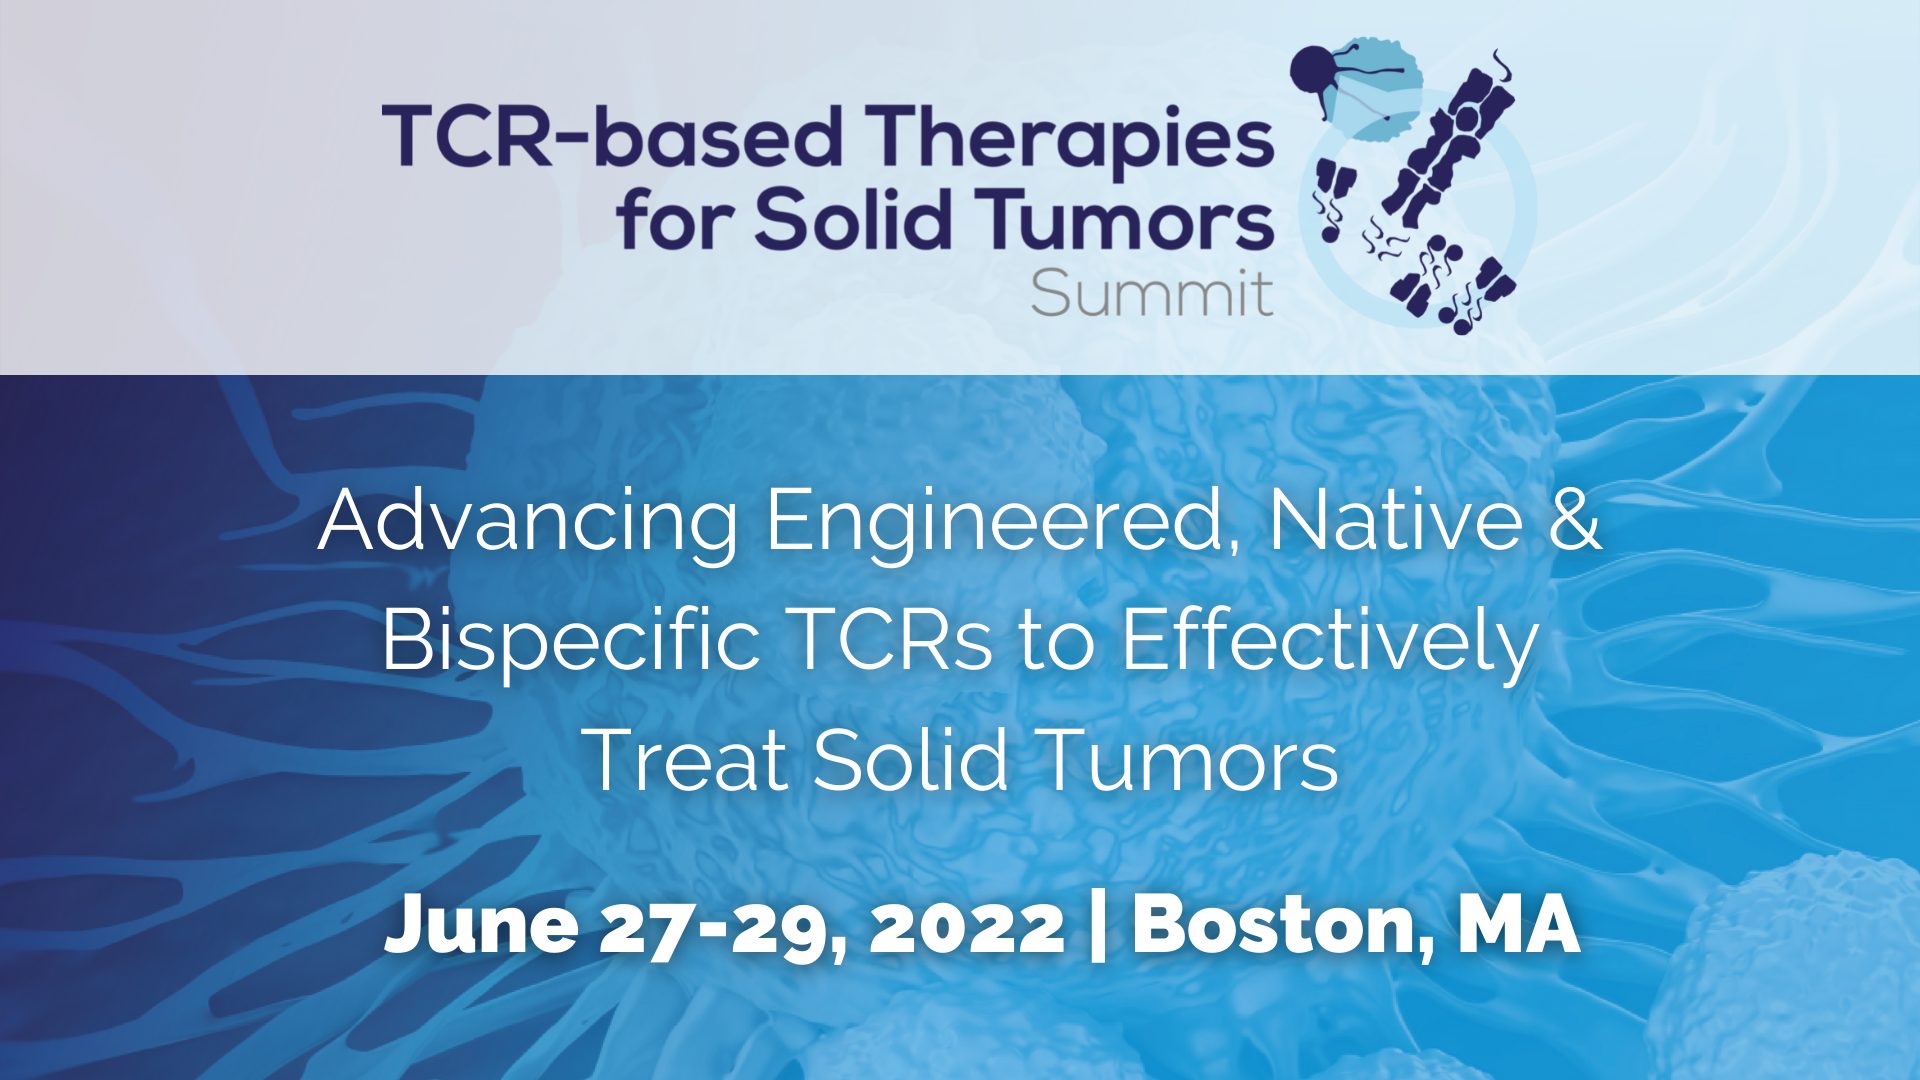 Advancing Engineered, Native & Bispecific TCRs to Effectively Treat Solid Tumors